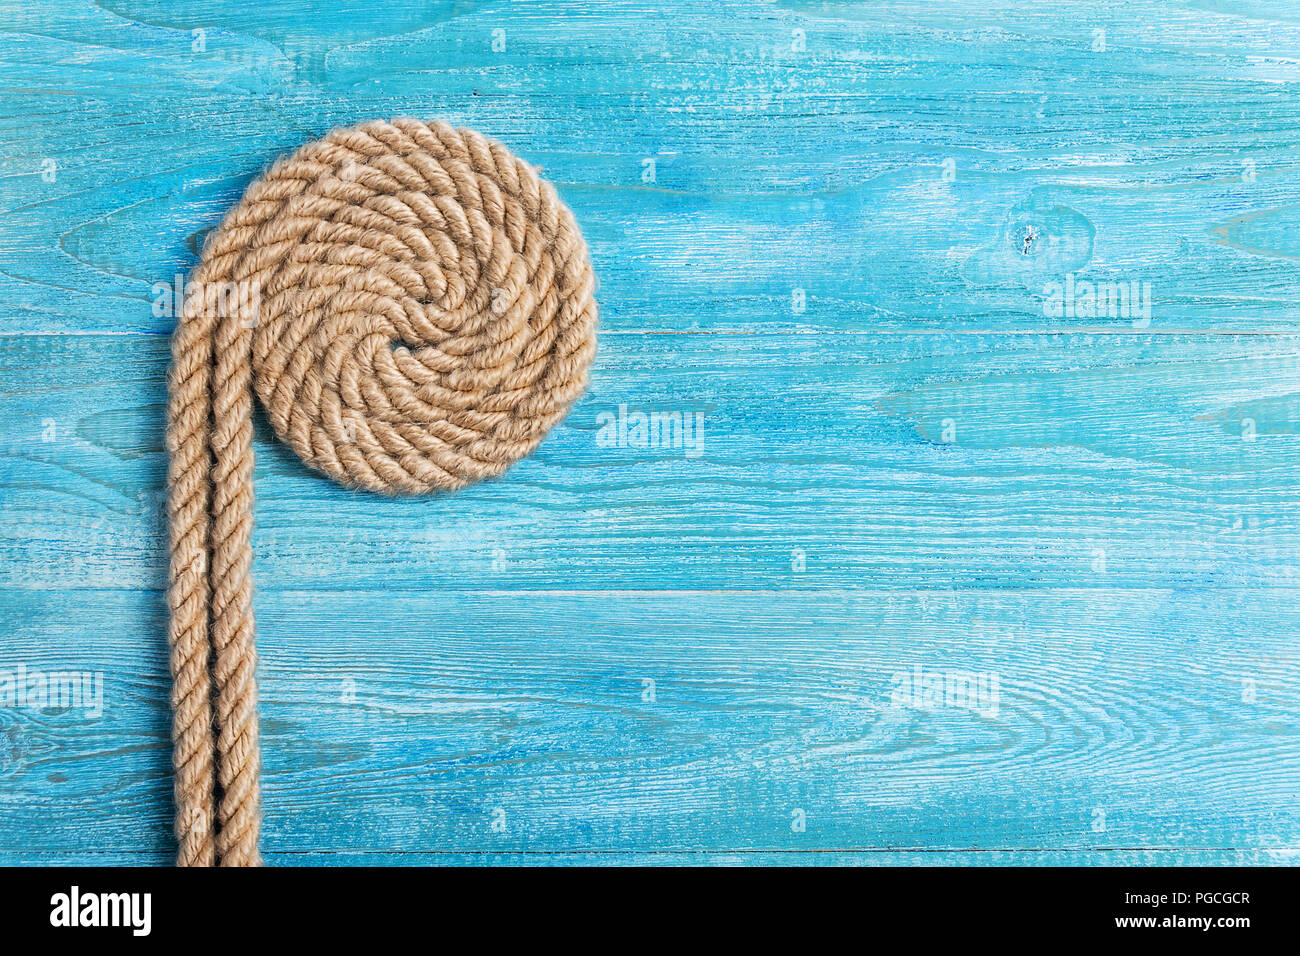 Rope, knot and background wood Stock Photo